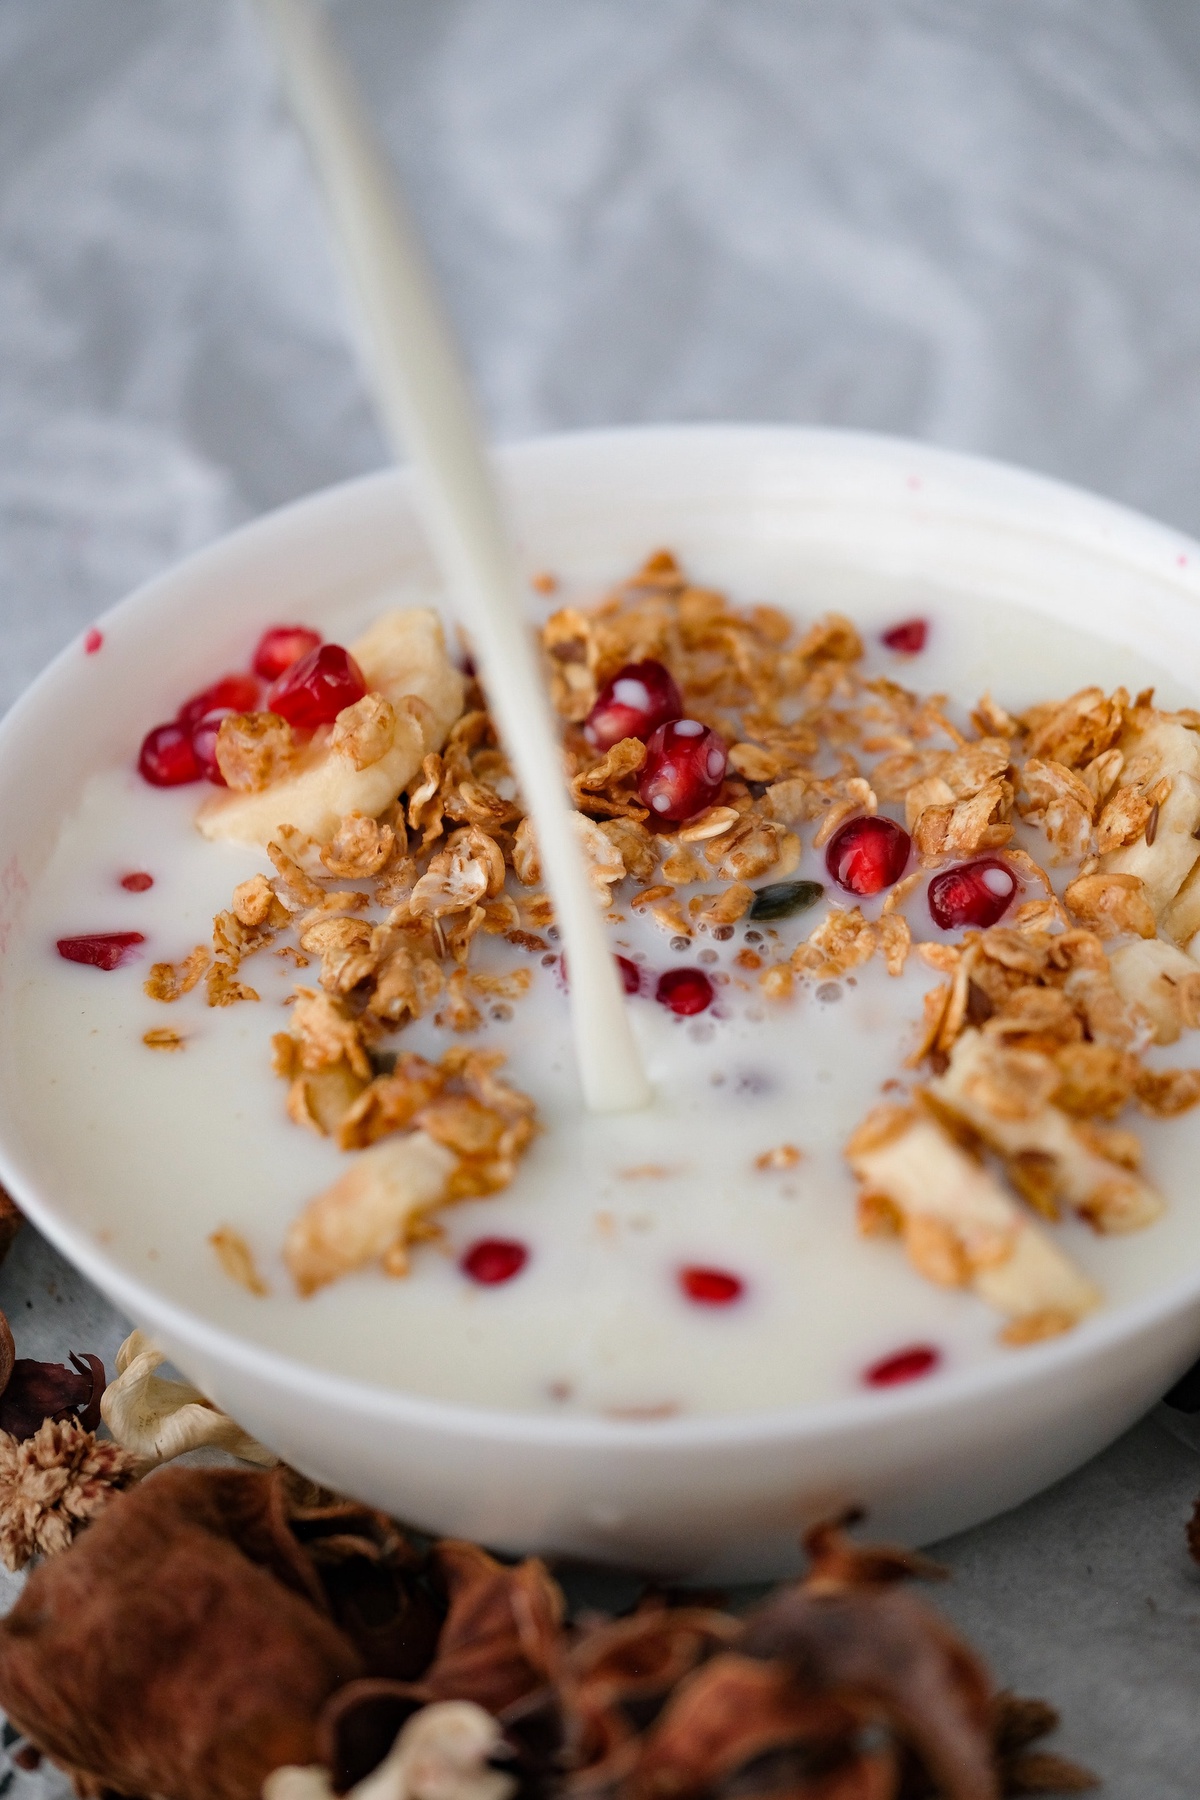 Can Cereal Revolutionize Your Healthy Lifestyle?